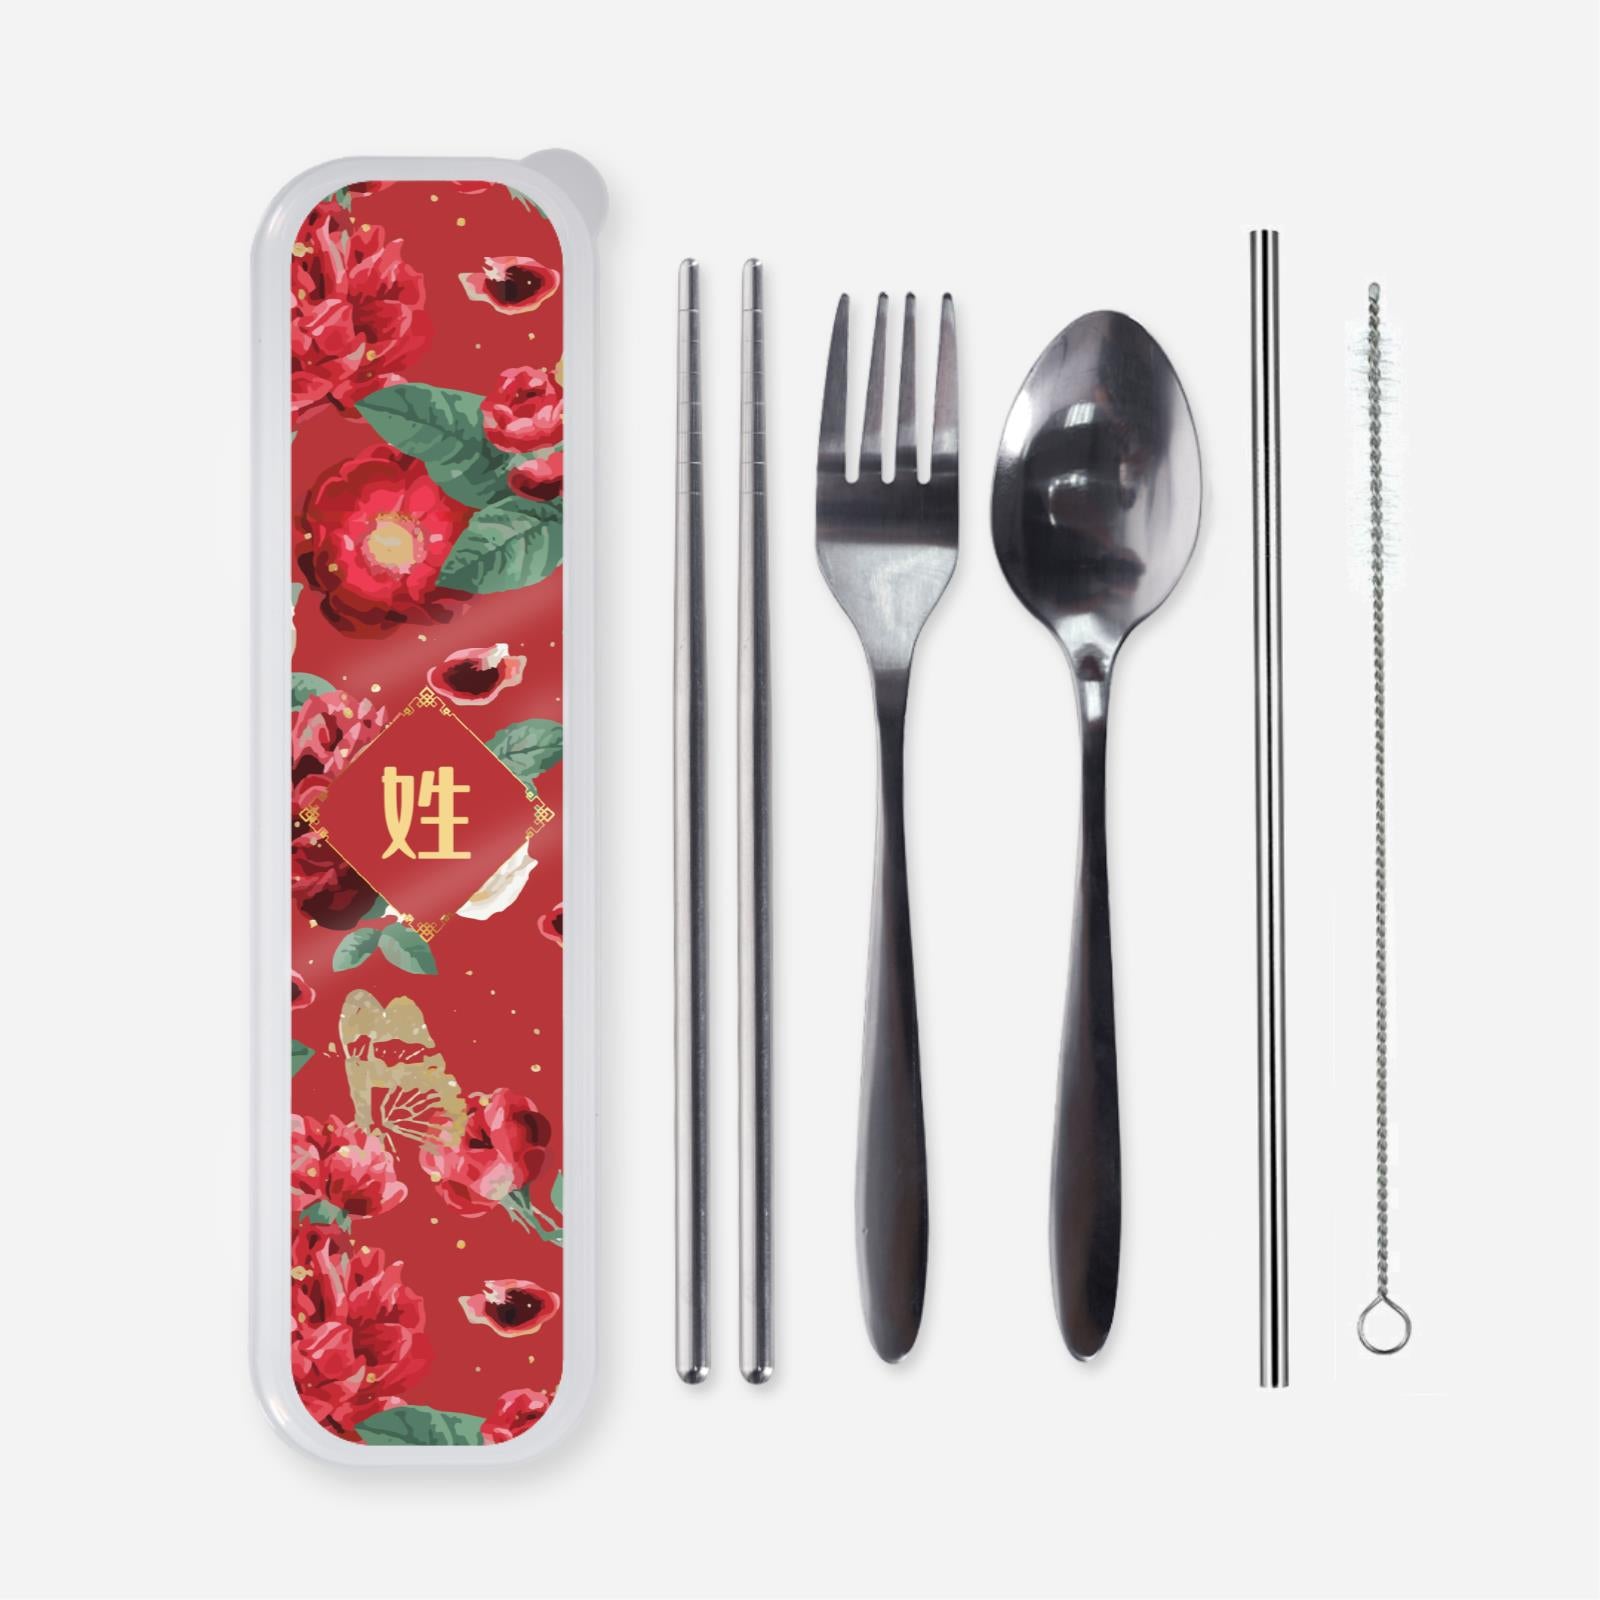 Royal Floral Series - Scorching Passion Cutlery With Chinese Personalization